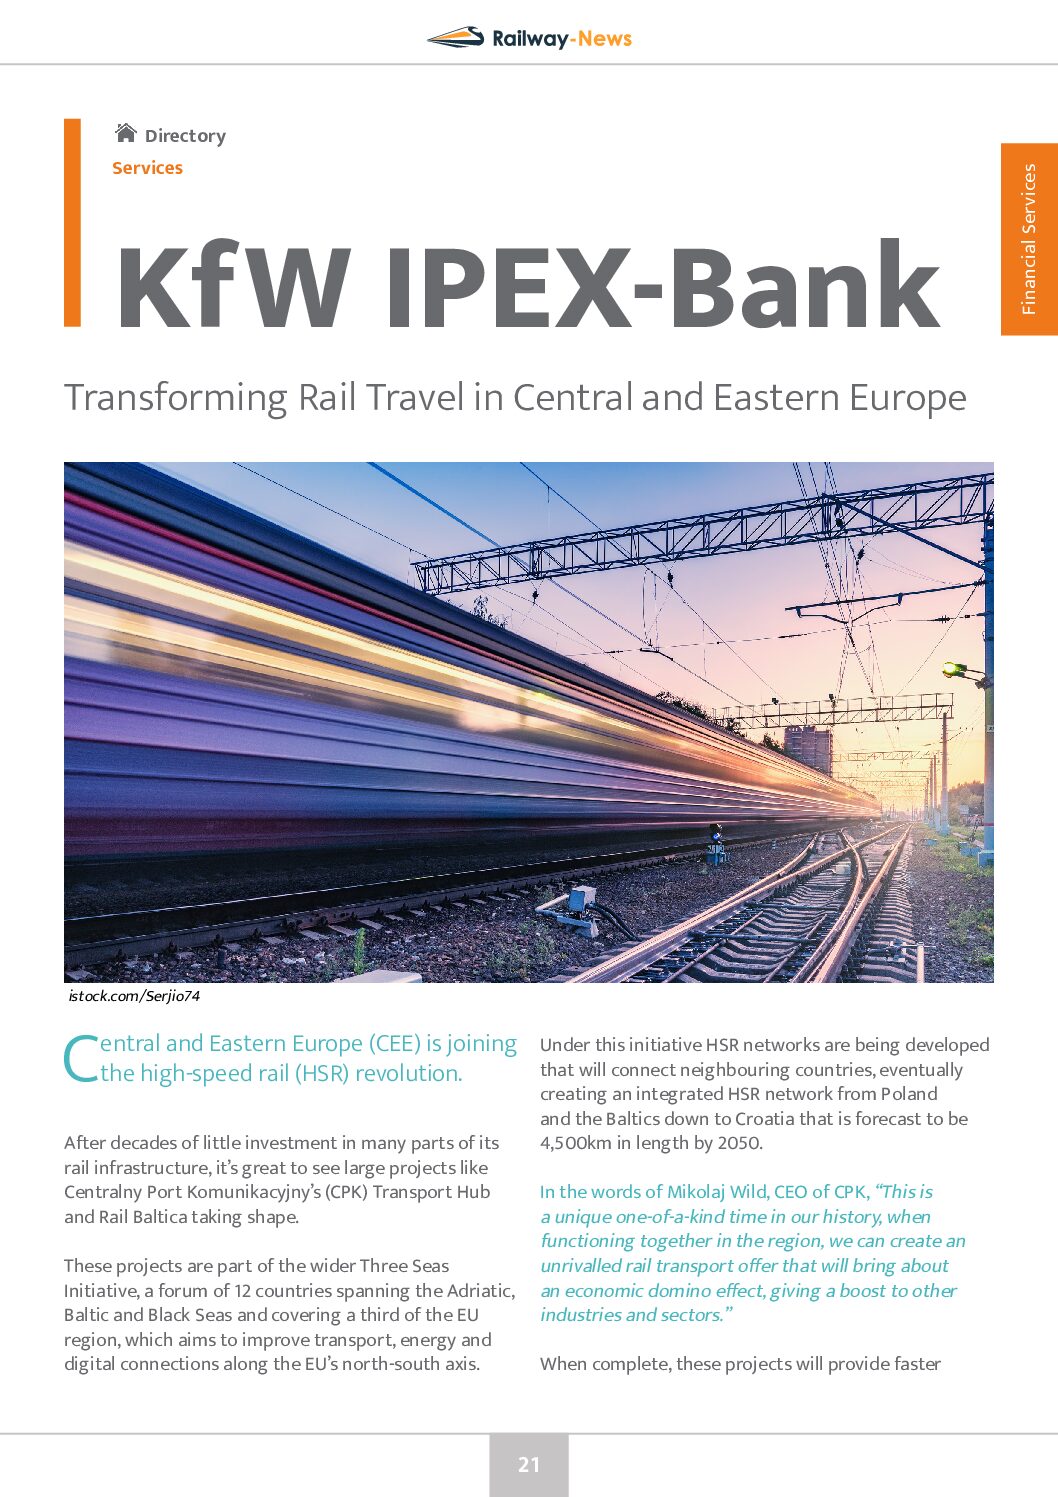 Transforming Rail Travel in Central and Eastern Europe